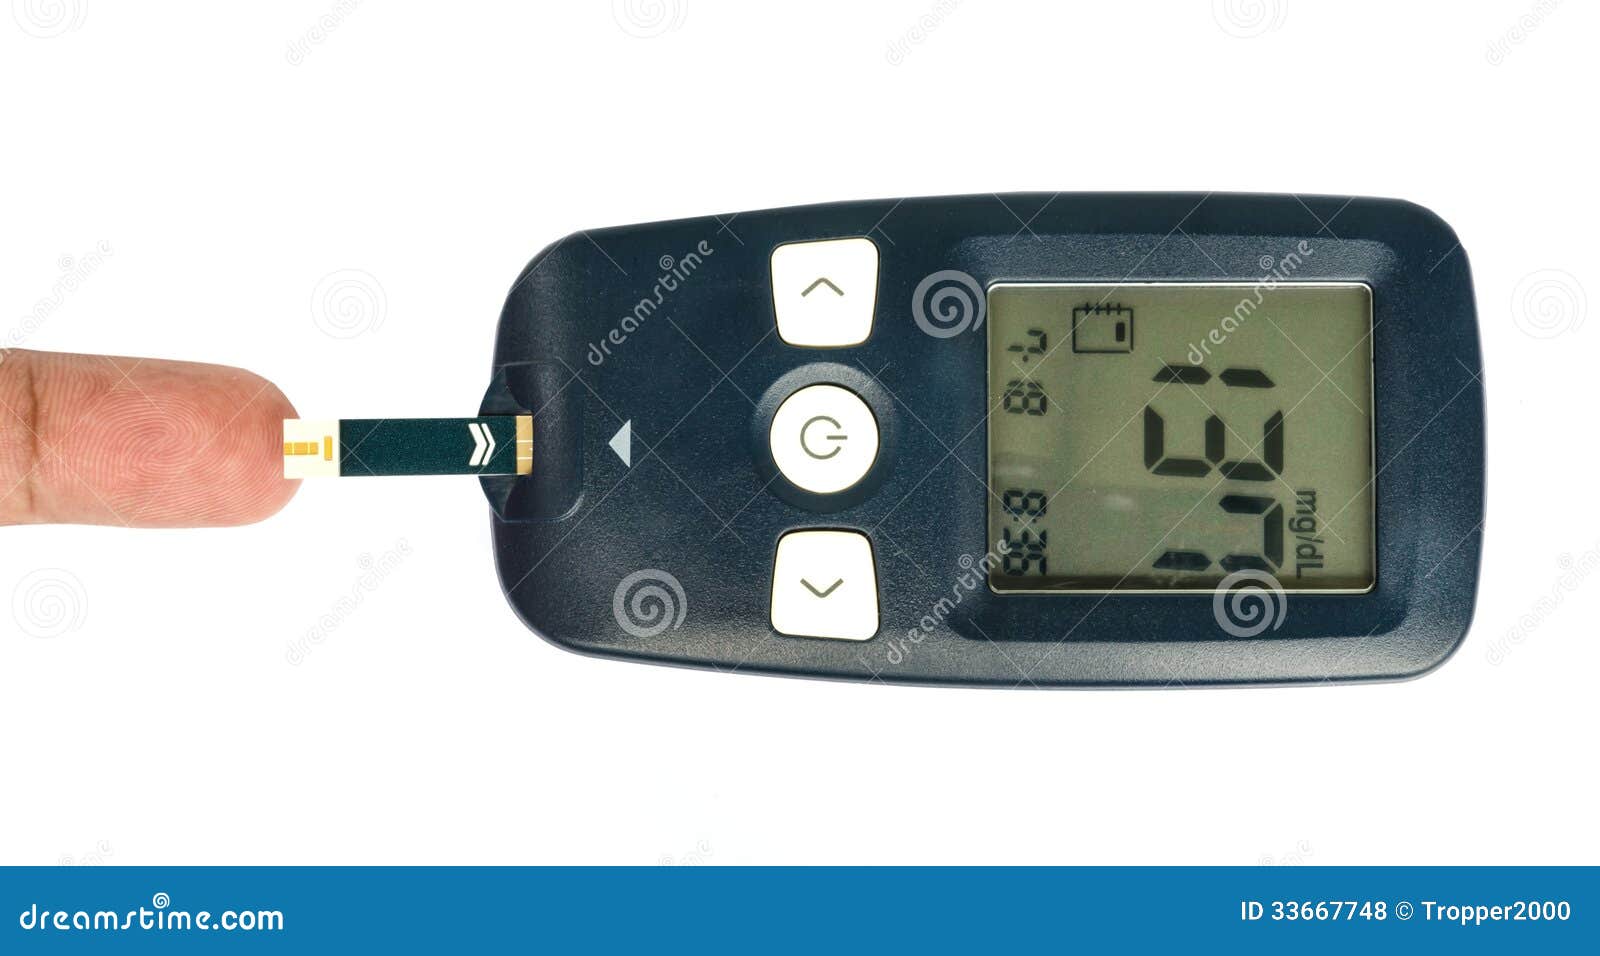 clipart blood glucose monitor - photo #16